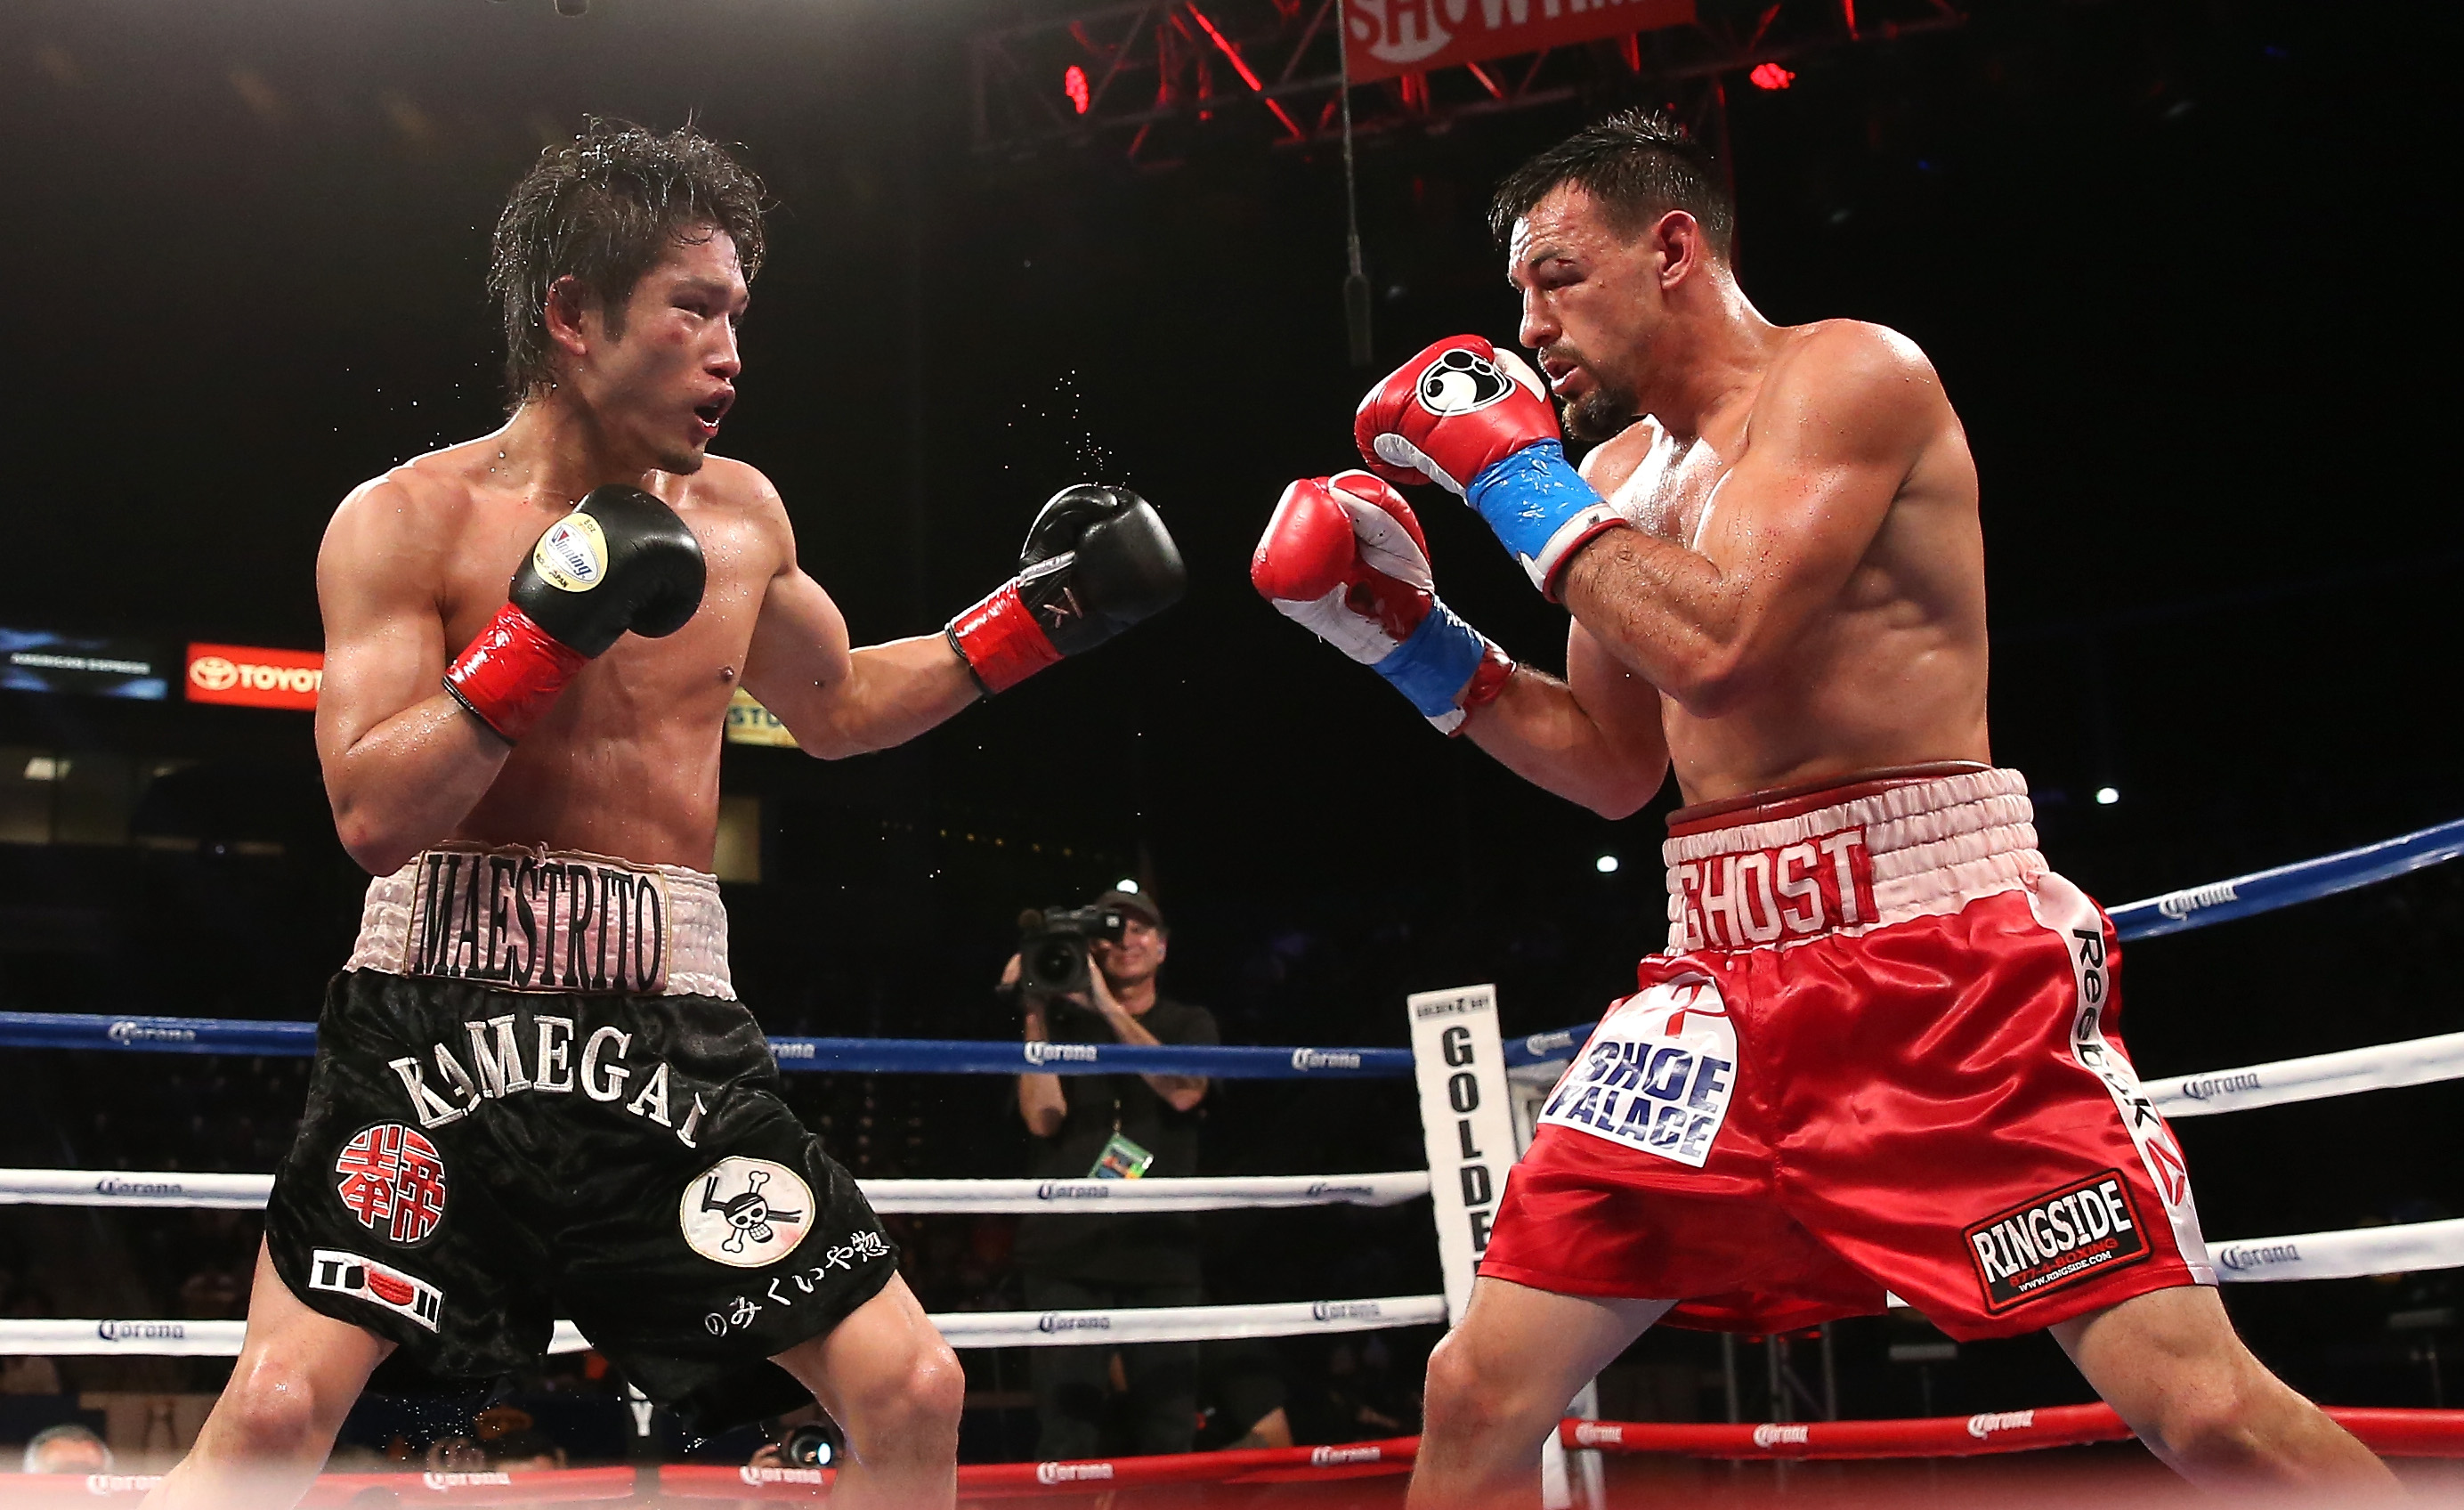 Robert Guerrero battles  Yoshihiro Kamegai (R) in their welterweight bout at StubHub Center on June 21, 2014 in Los Angeles, California.  Guerrero won by unanimous decision.  (Photo by Stephen Dunn/Getty Images)